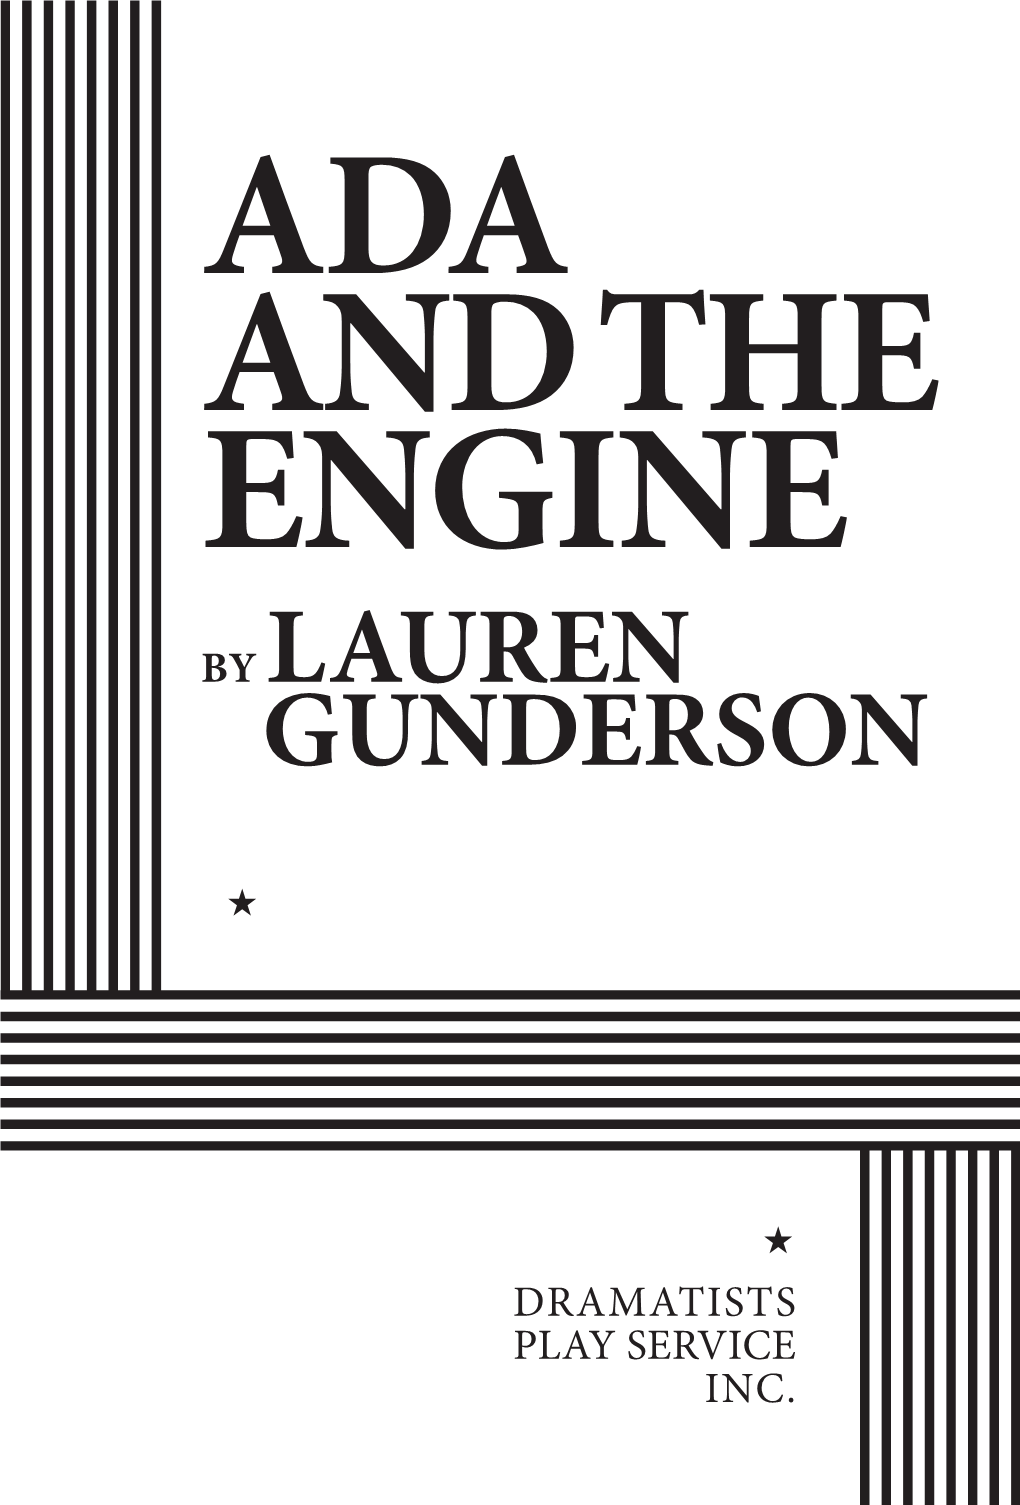 Ada and the Engine by Lauren Gunderson